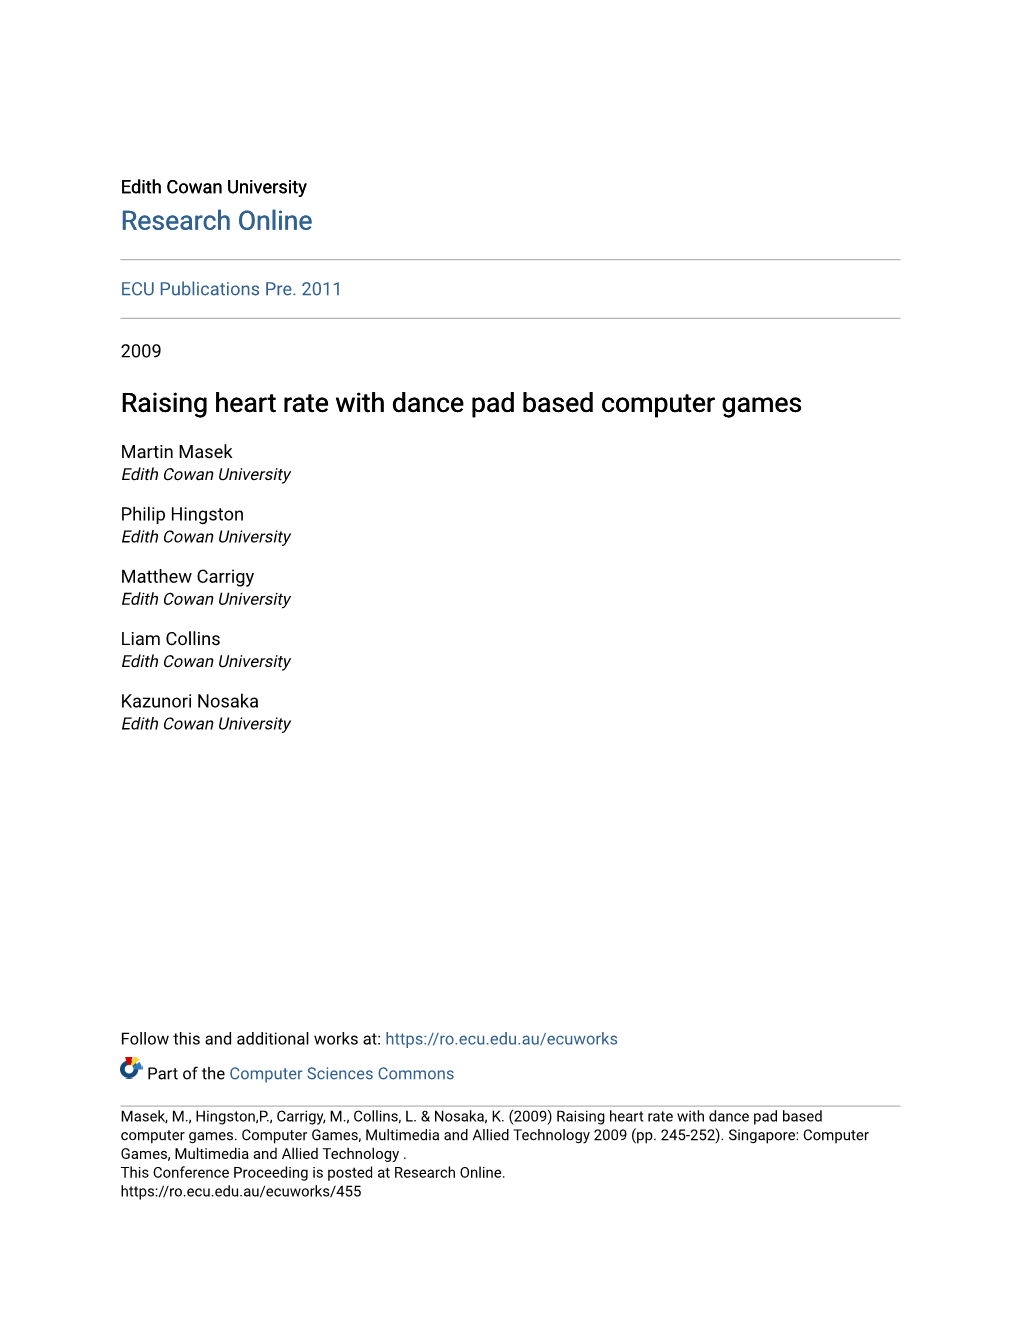 Raising Heart Rate with Dance Pad Based Computer Games